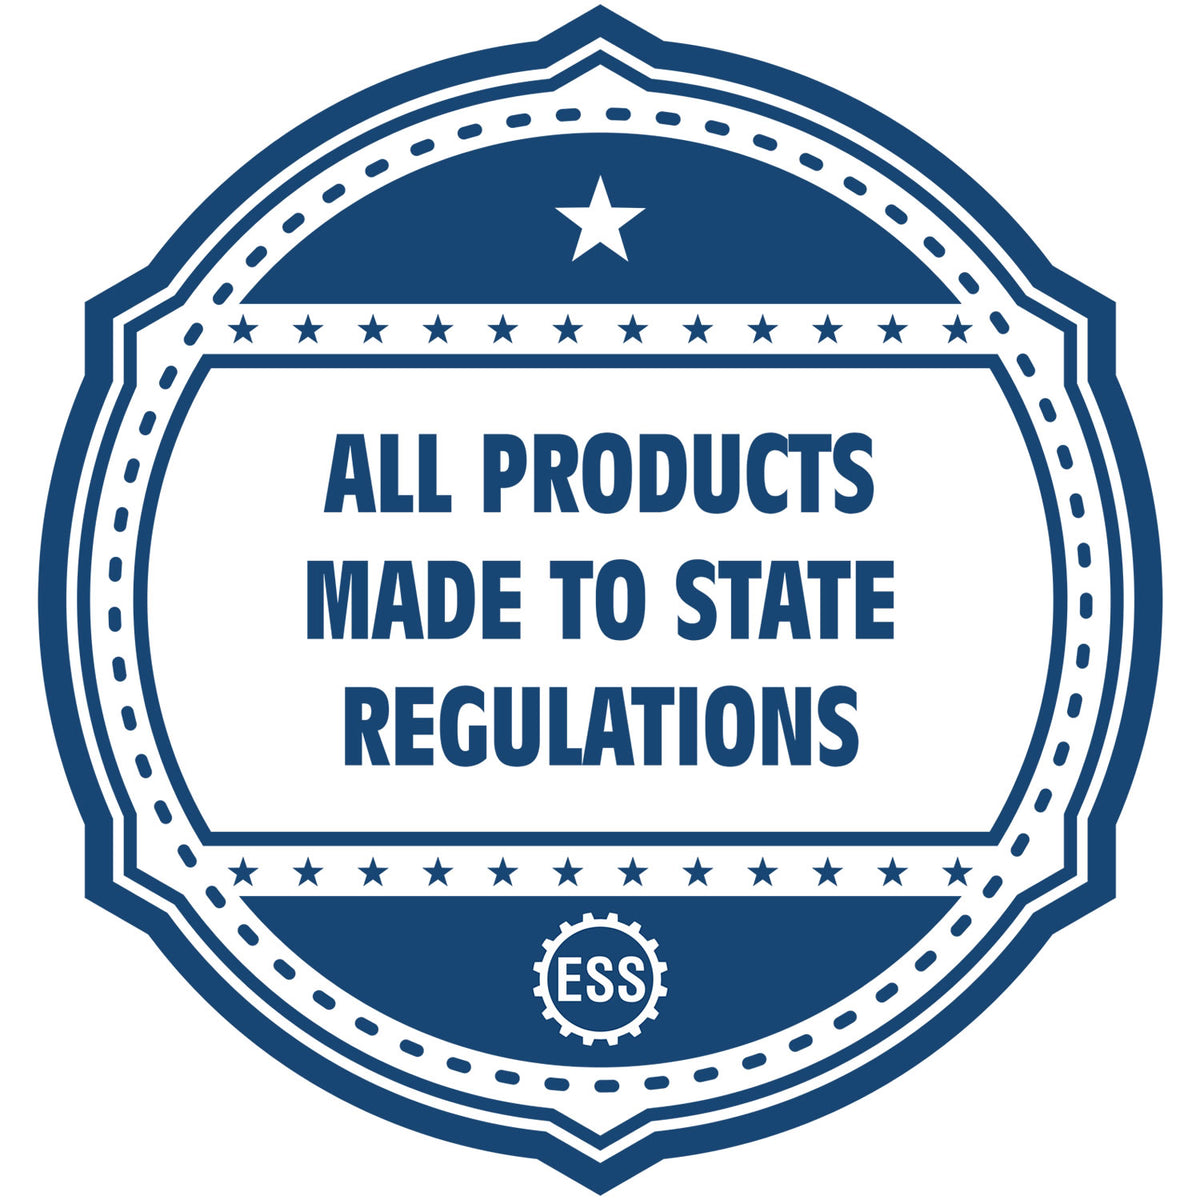 An icon or badge element for the Self-Inking State Seal Kansas Notary Stamp showing that this product is made in compliance with state regulations.